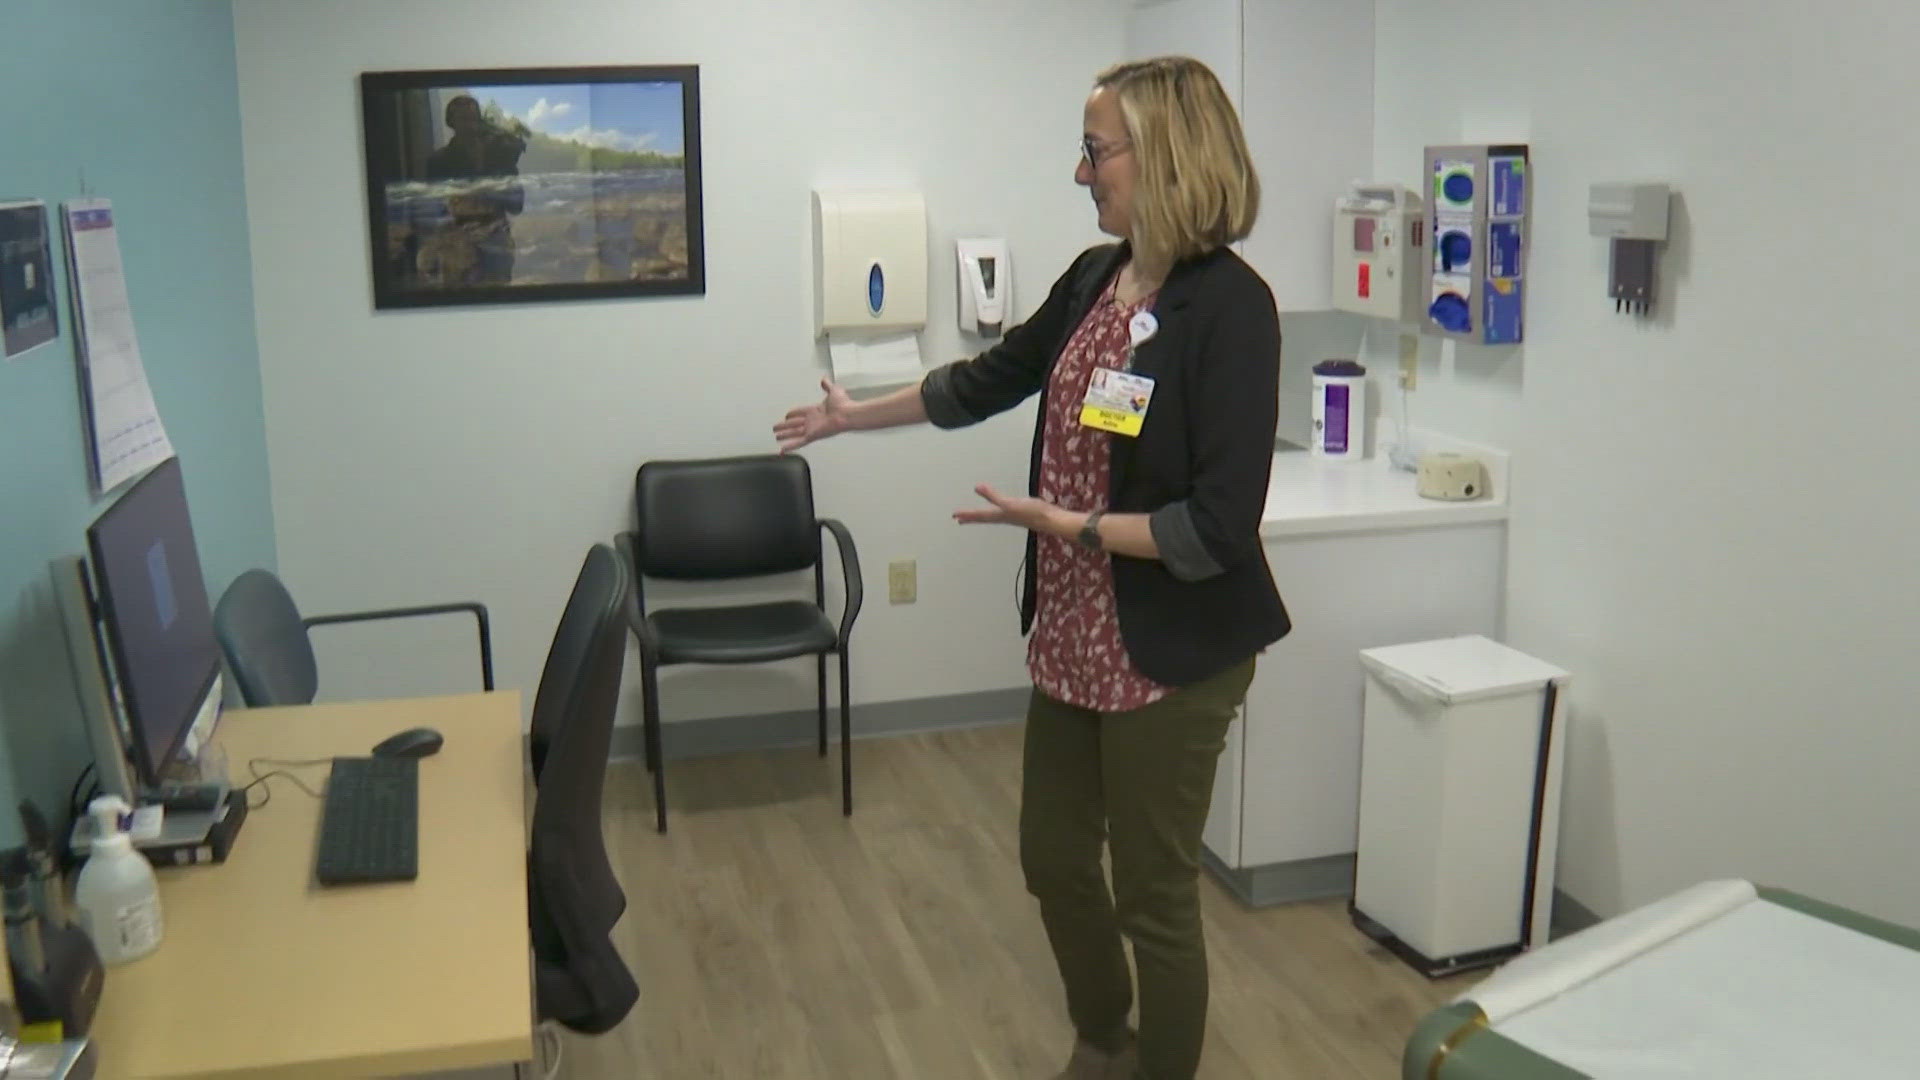 The clinic on St. John Street is supposed to act as a one-stop shop for medication-assisted treatment for substance use disorder.